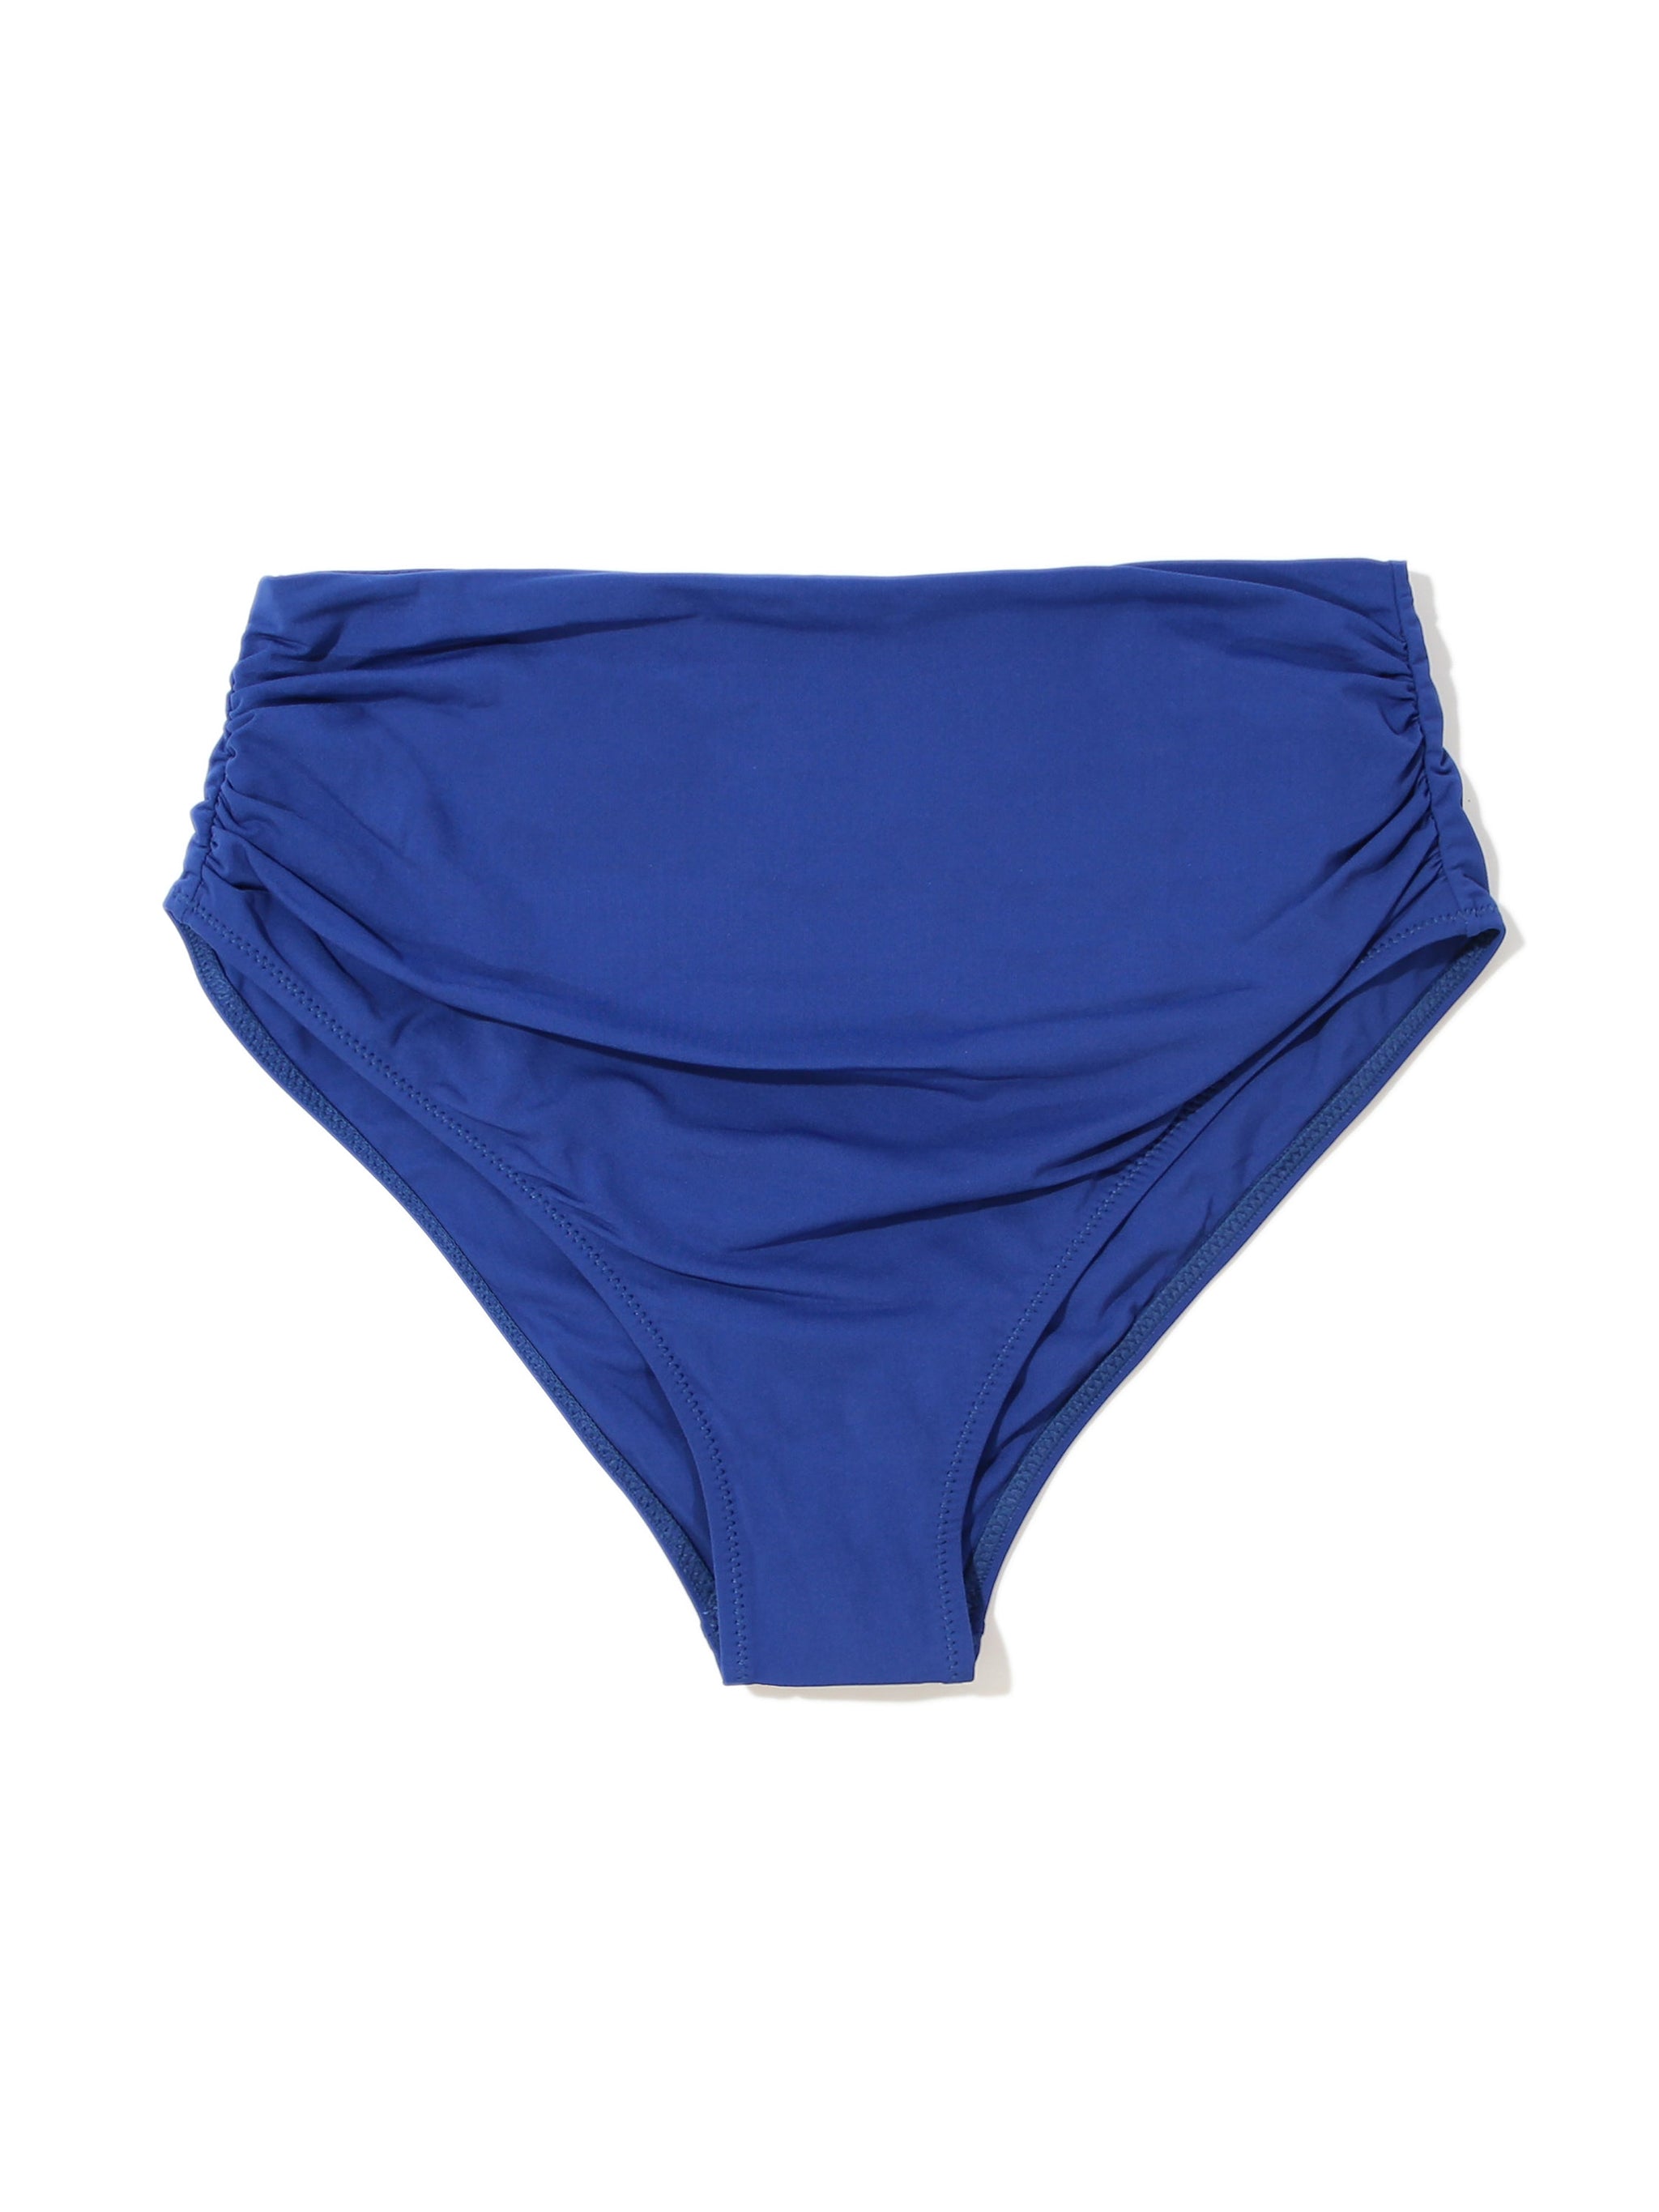 High Rise Cheeky Swimsuit Bottom Poolside Blue